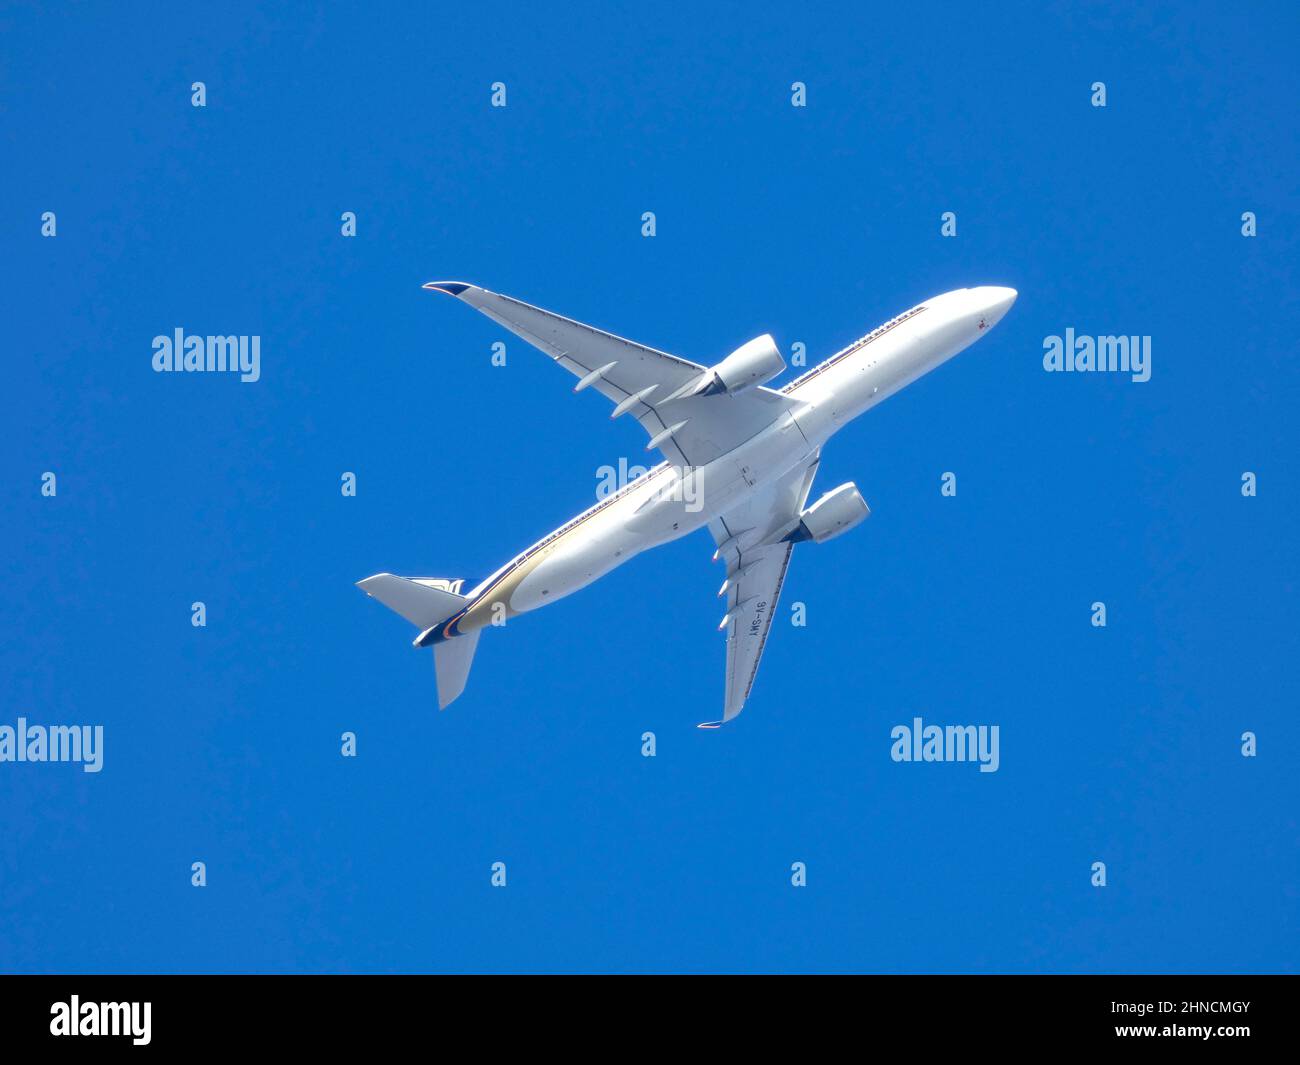 Commercial passenger aircraft flying over blue sky Stock Photo